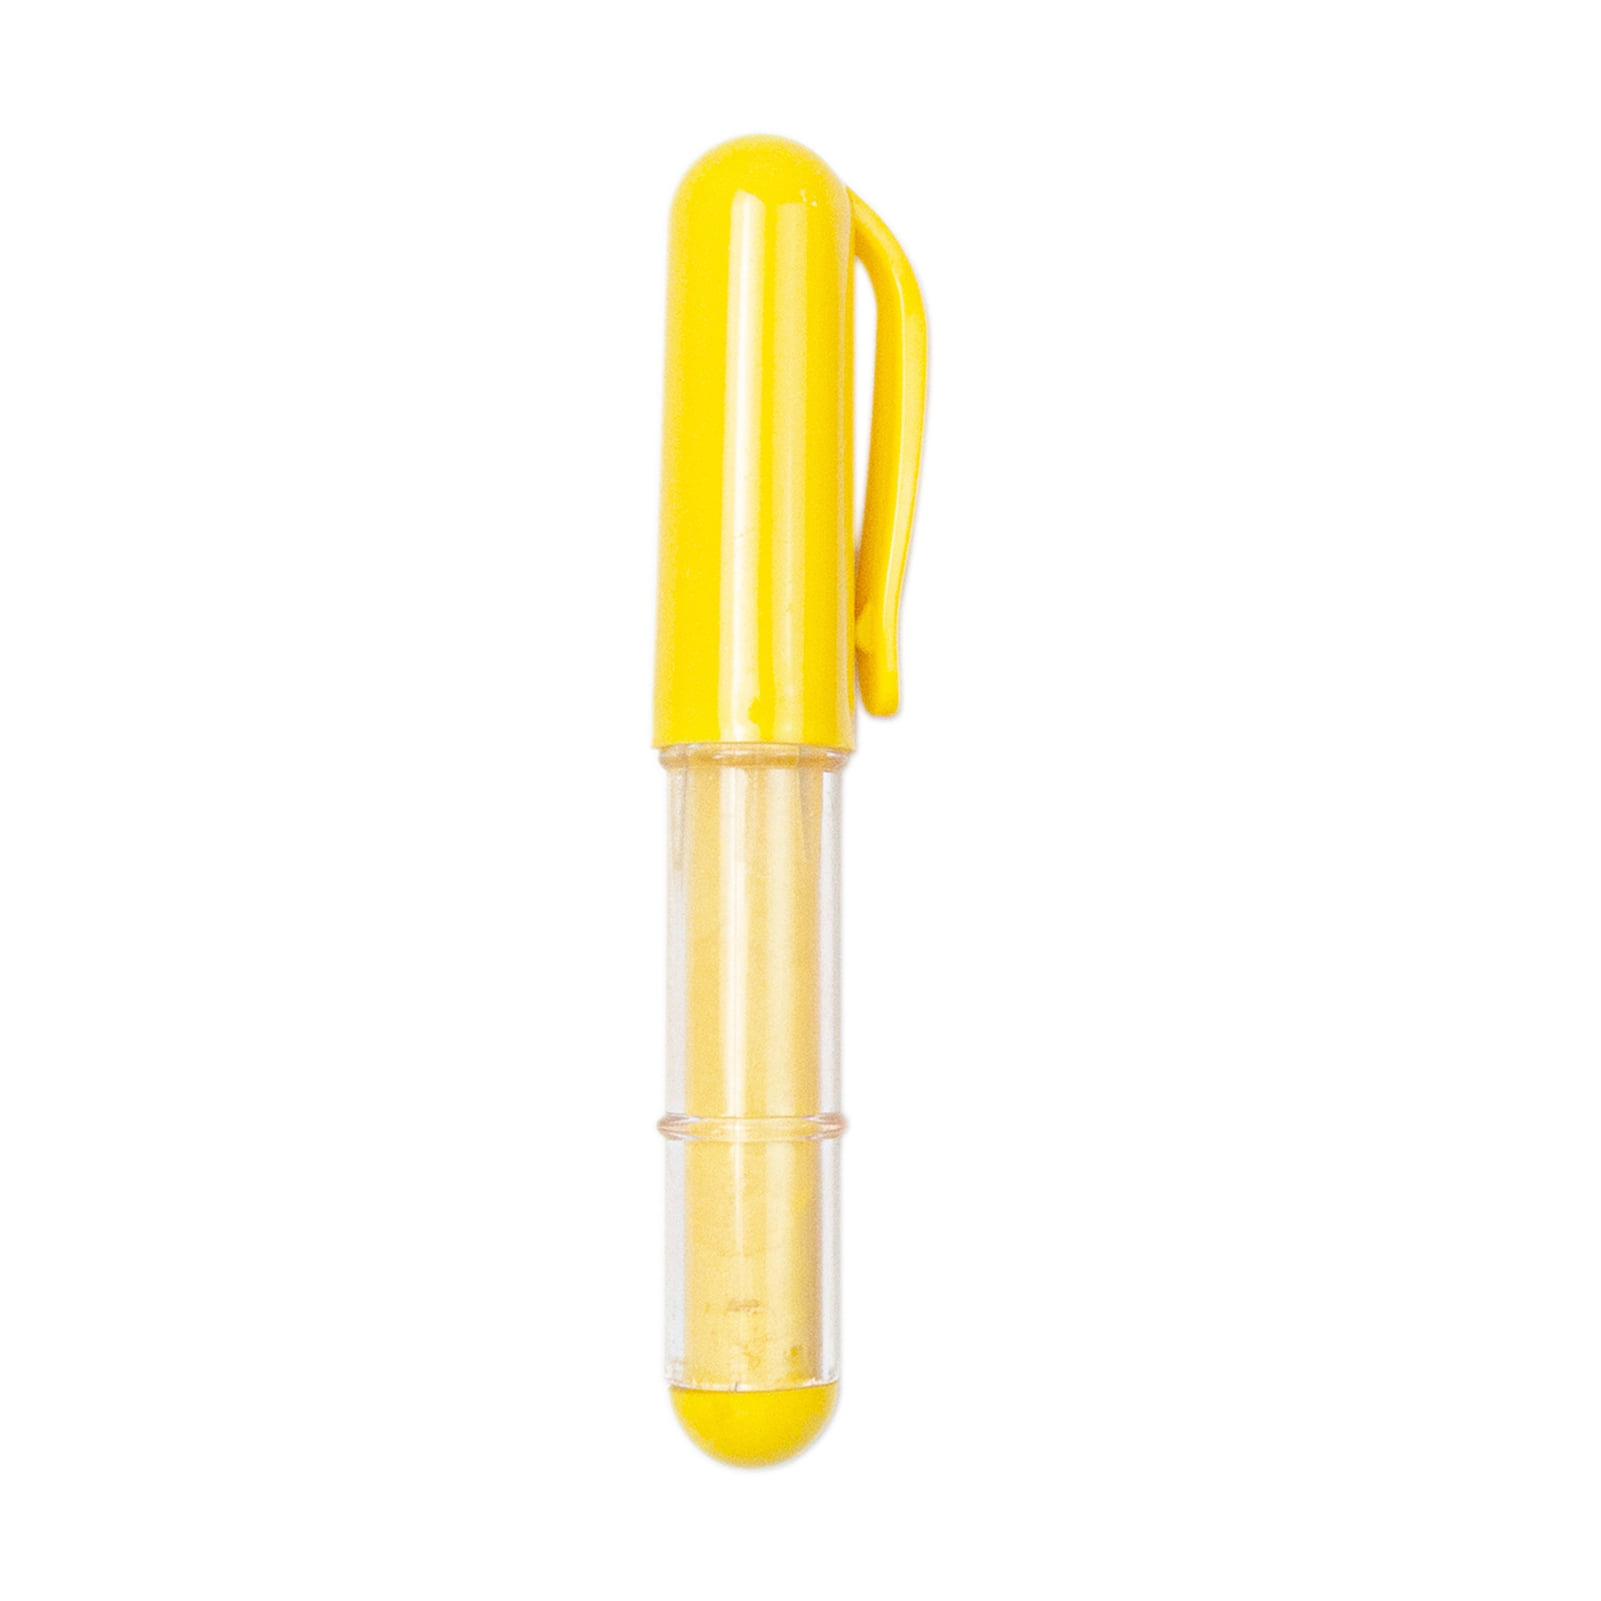 Tailor chalk pen with applicator, yellow color - TEXI 4040 YELLOW